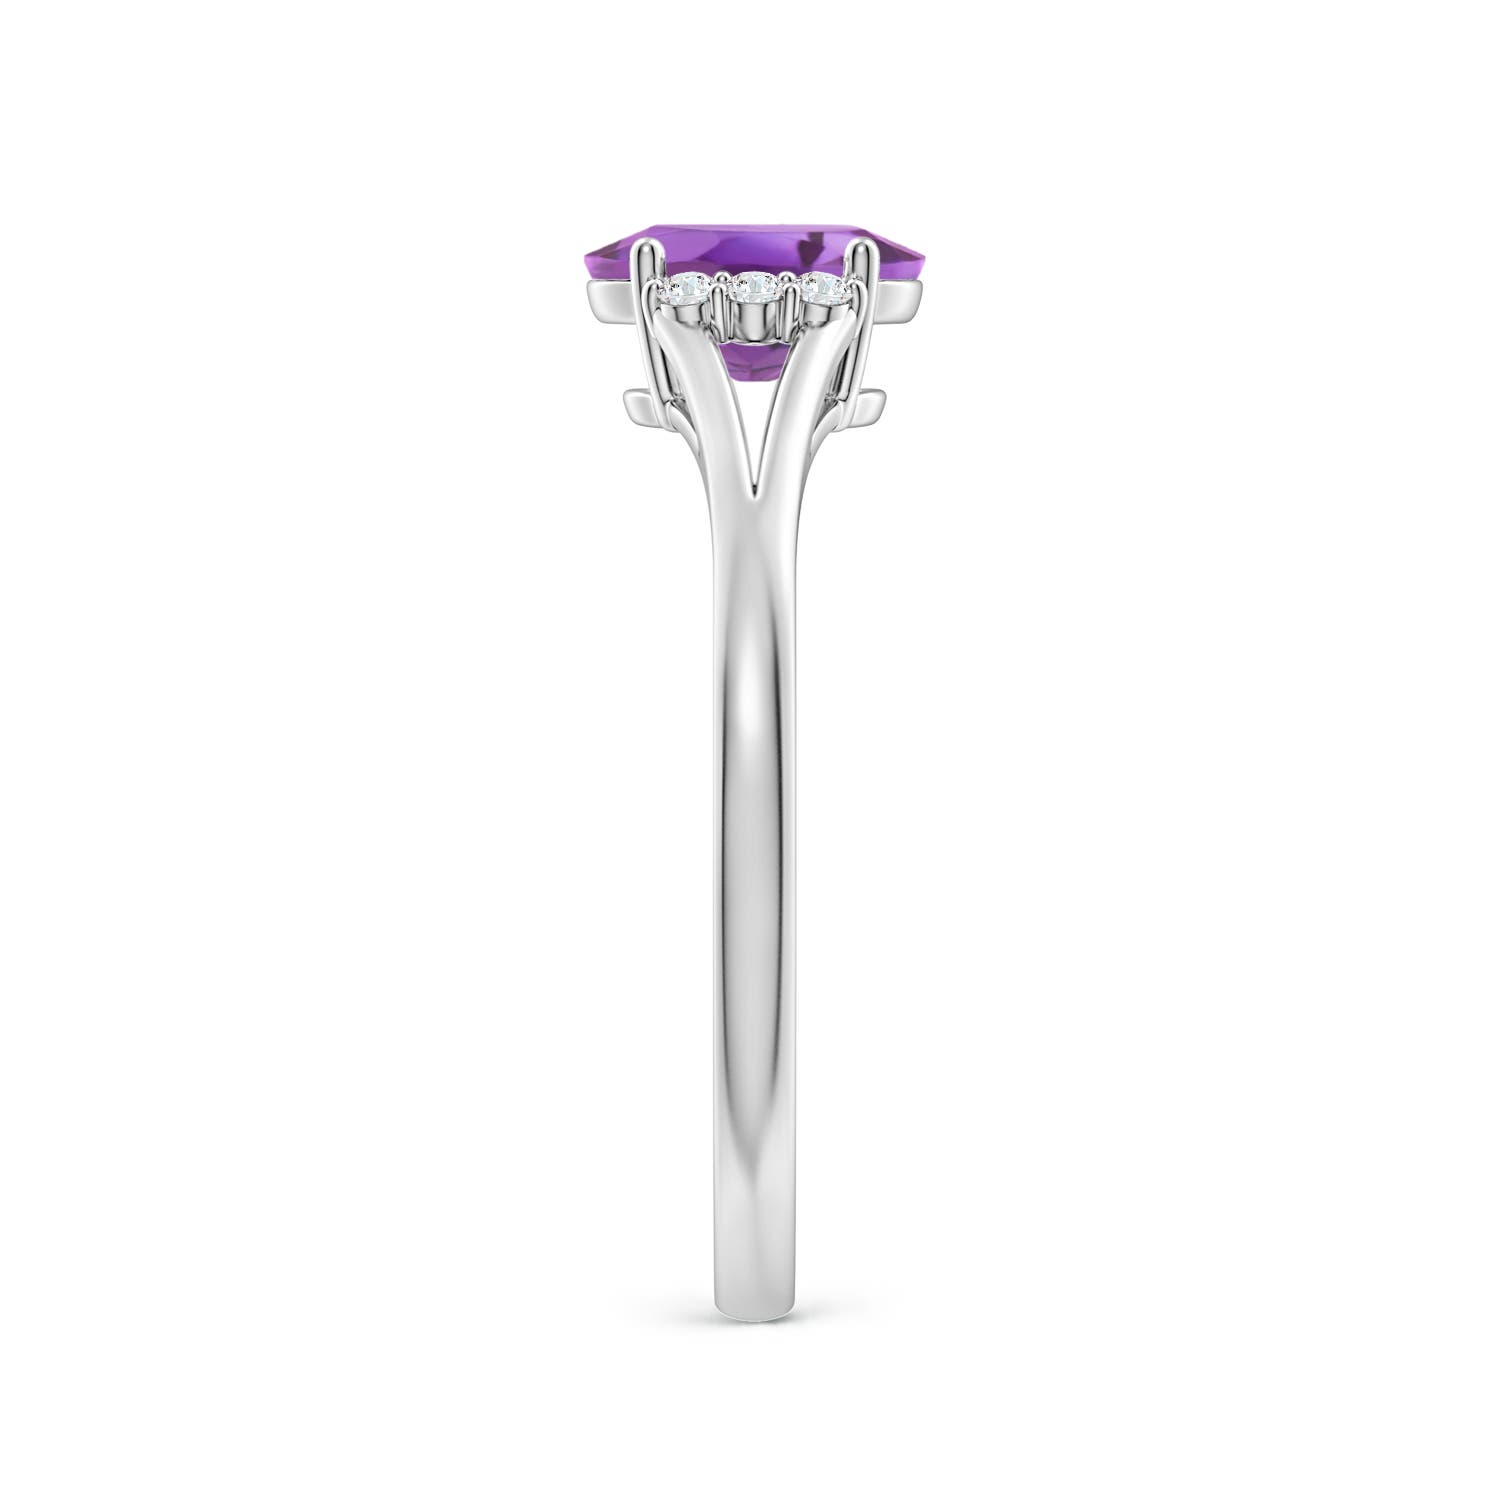 A - Amethyst / 0.77 CT / 14 KT White Gold